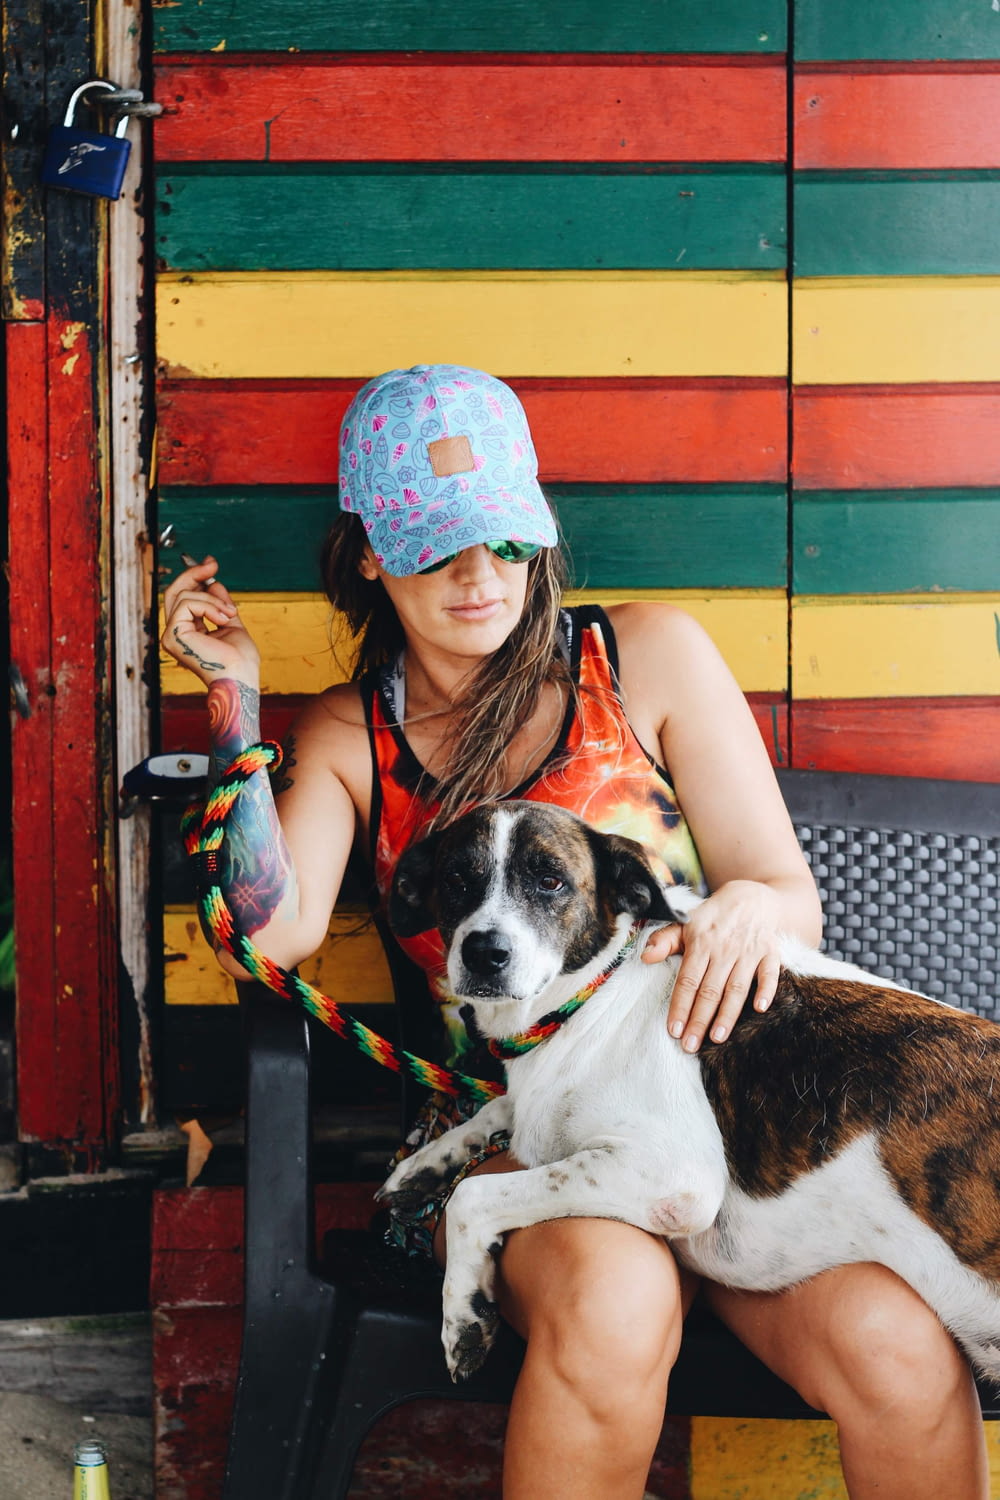 woman wearing blue baseball cap and orange tank top sitting on chair with dog